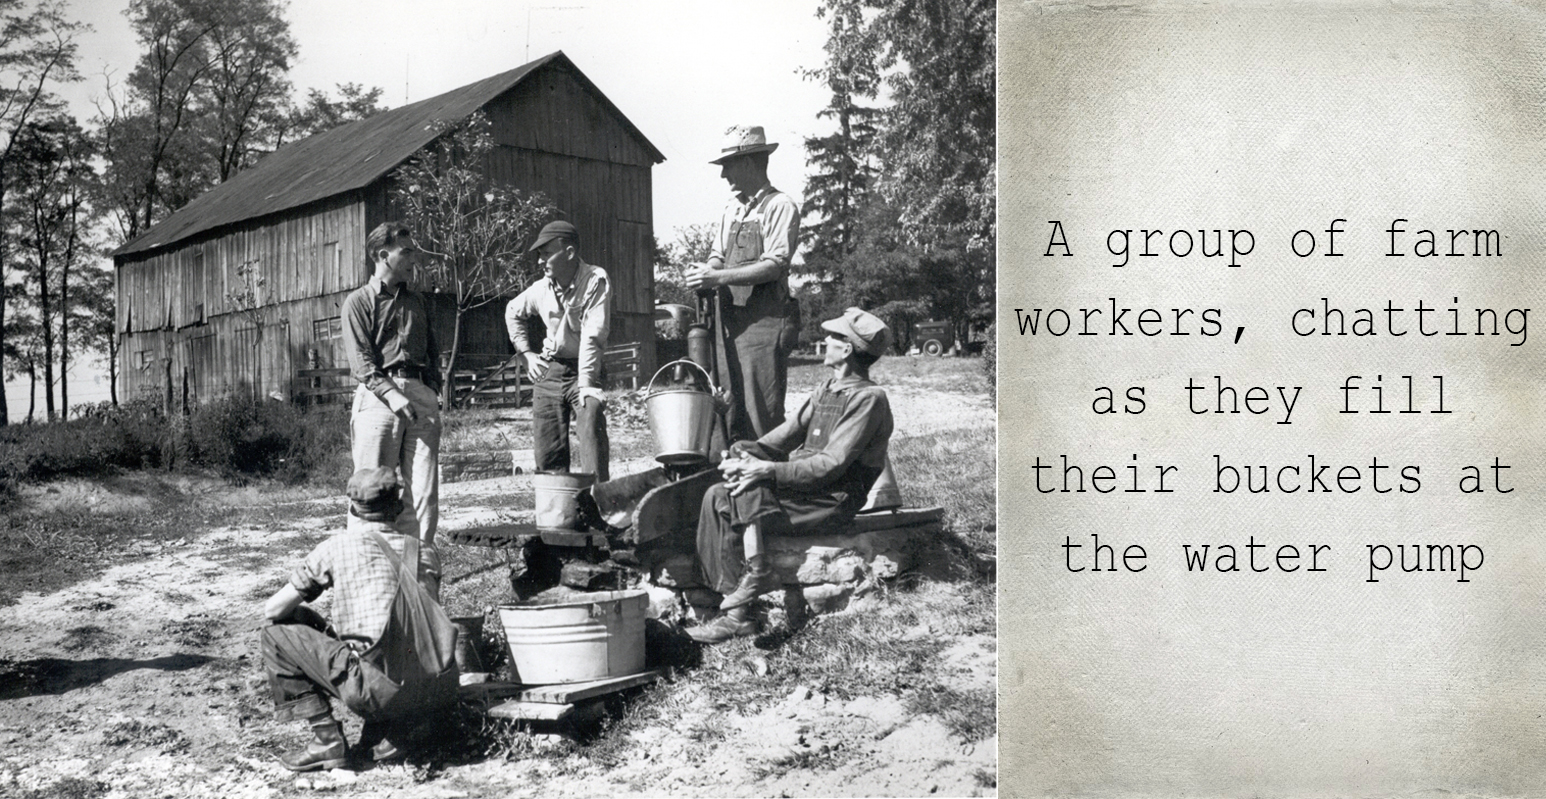 A group of farm workers, chatting as they fill their buckets at the water pump